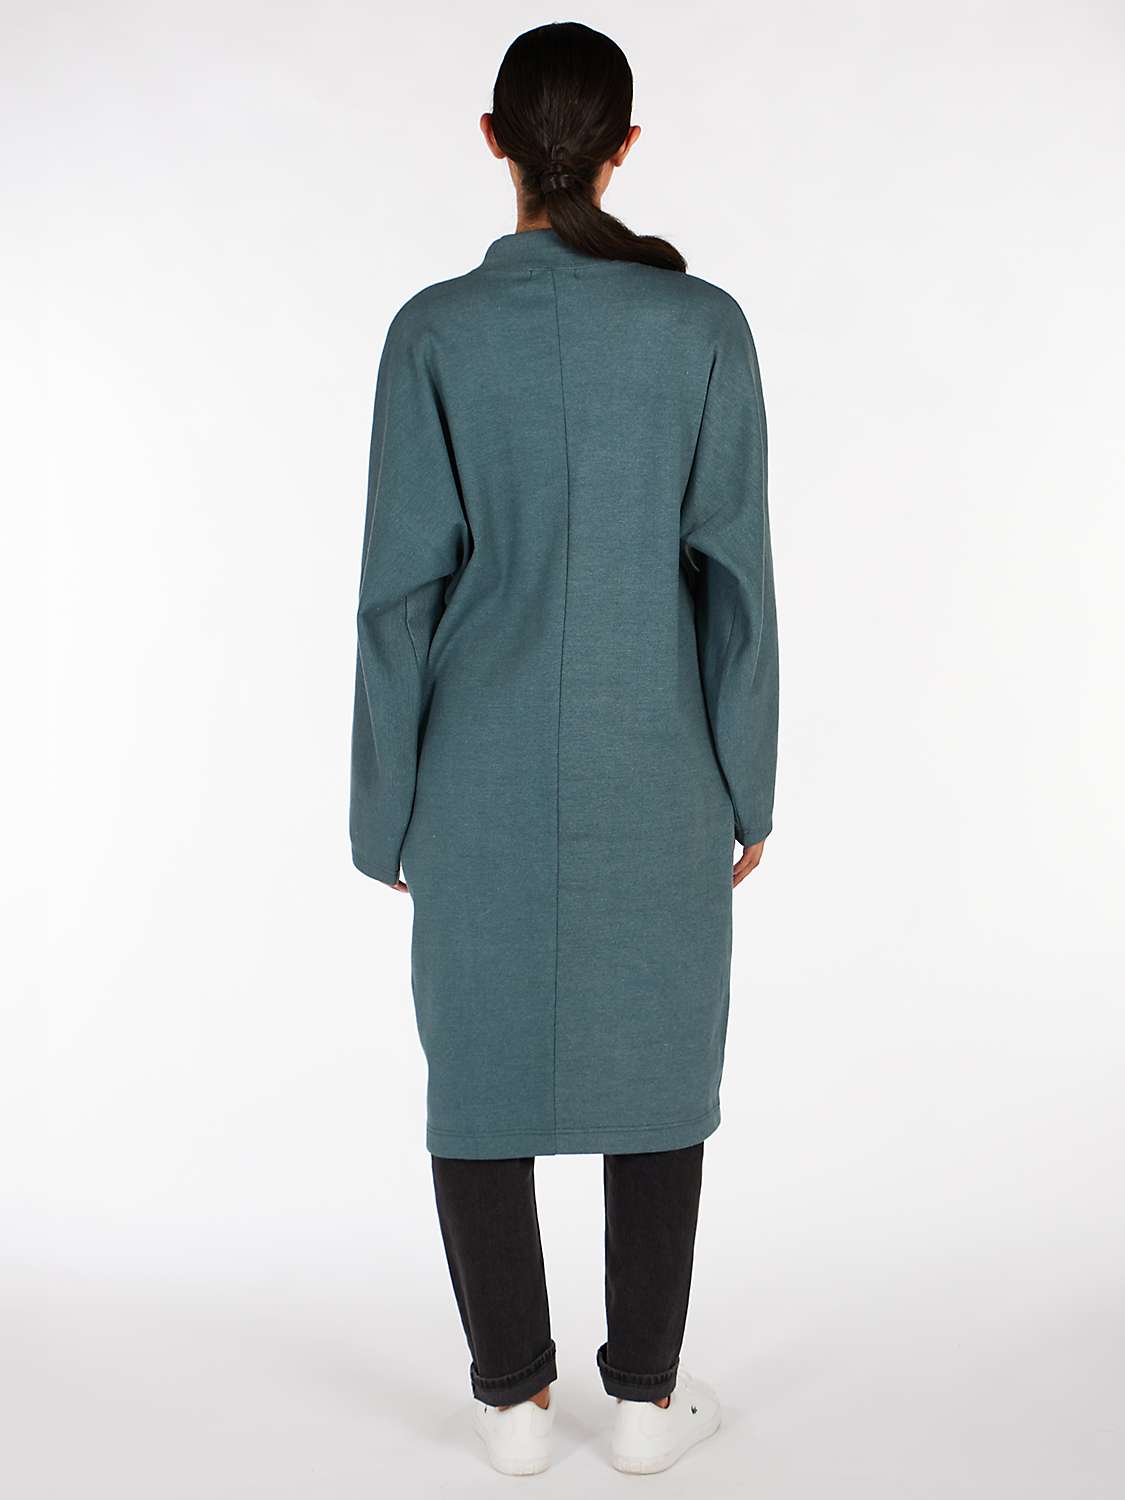 Buy Aab Loose Fit Knit Midi Dress Online at johnlewis.com